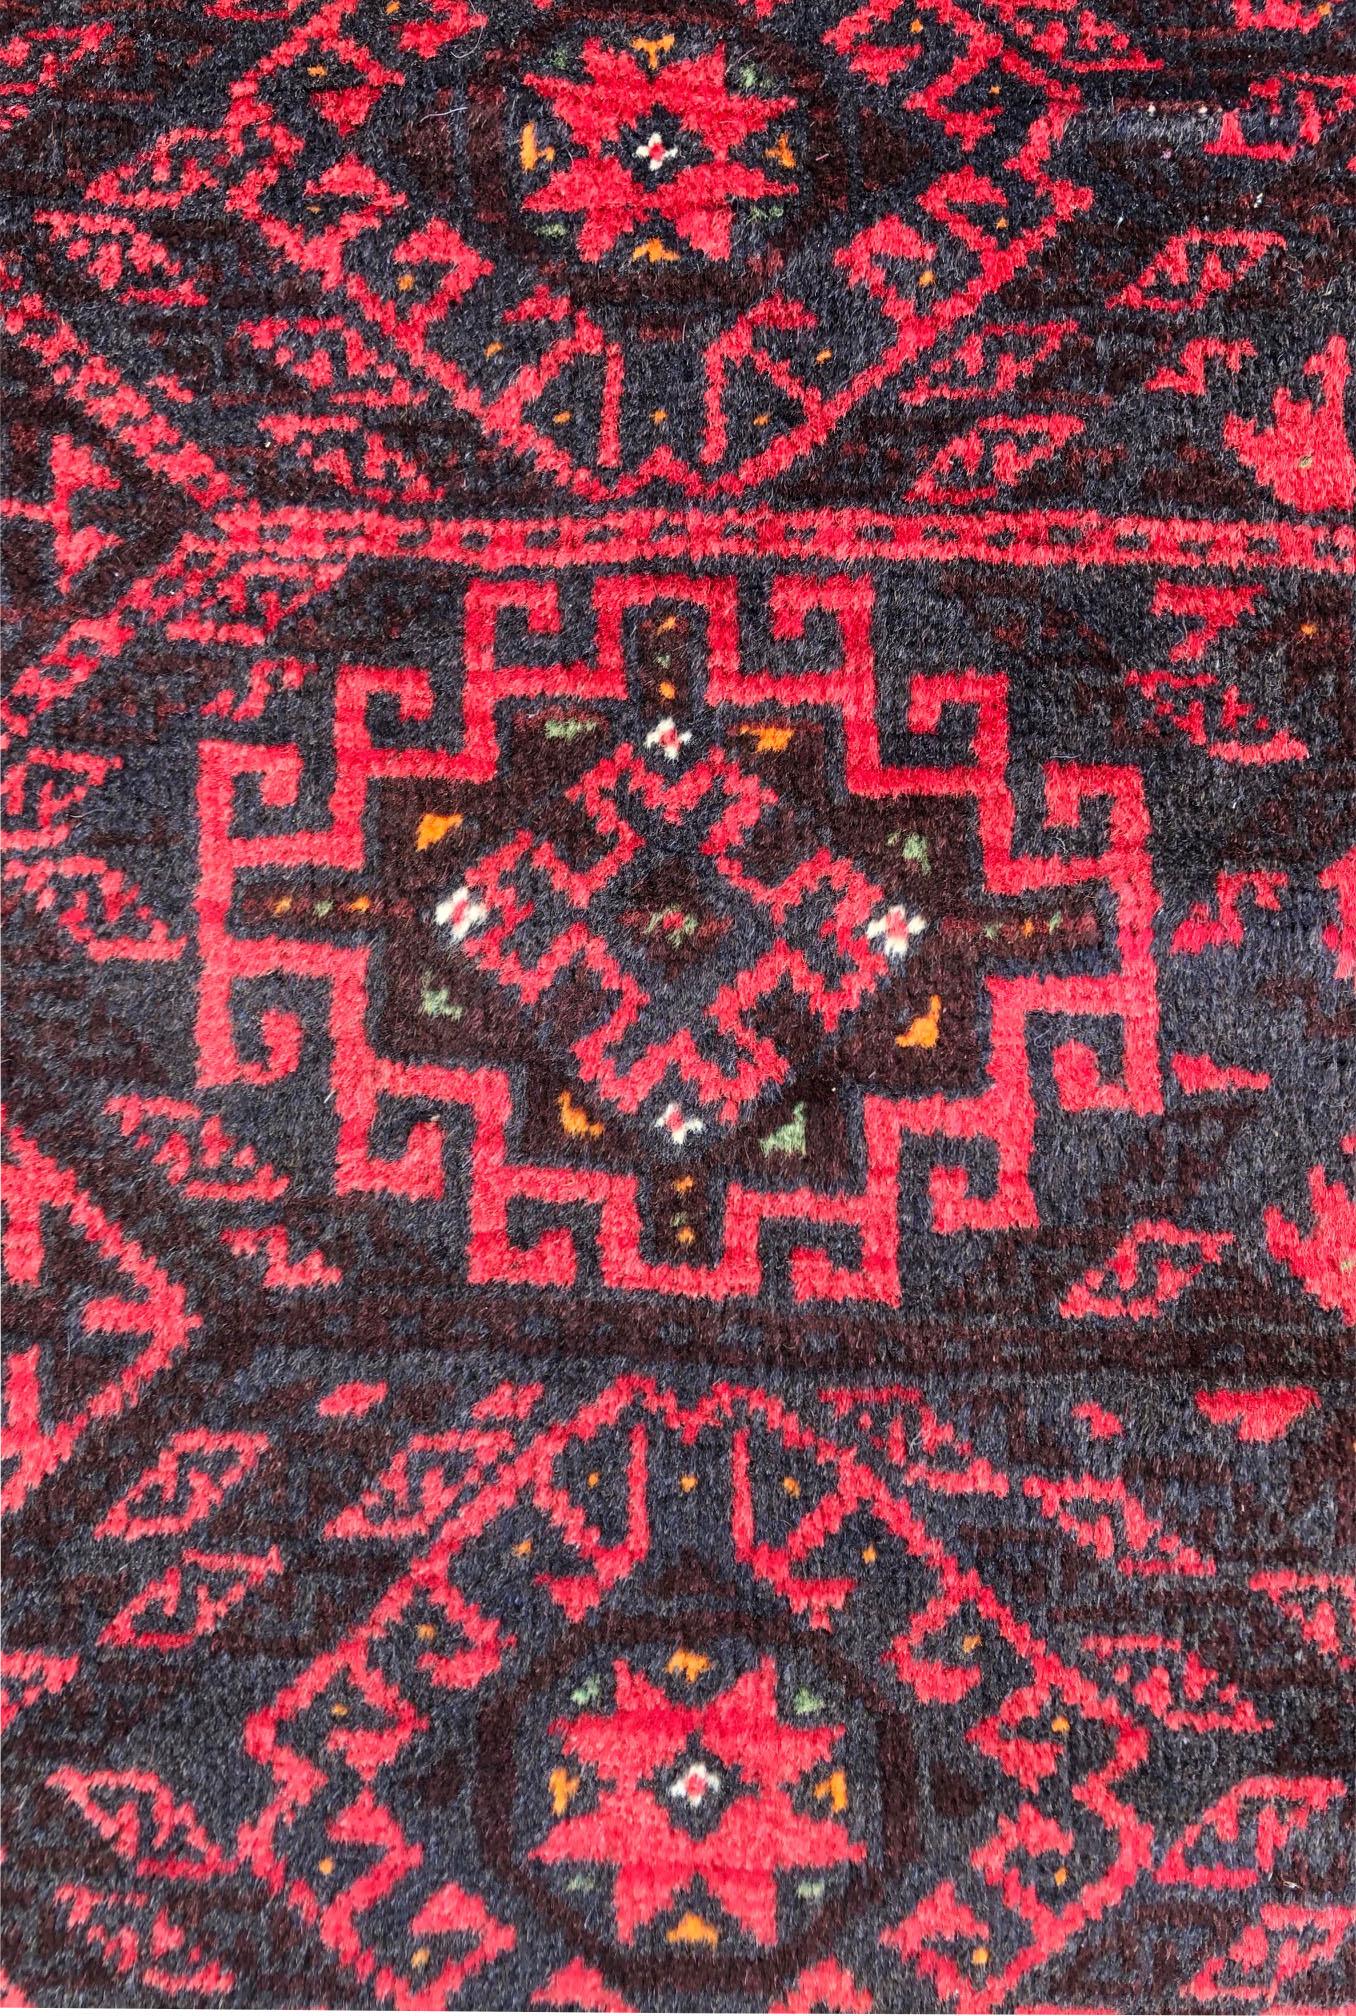 Tribal Authentic Persian Hand Knotted Geometric All-Over Red Black Baluchi Rug, 1960 For Sale